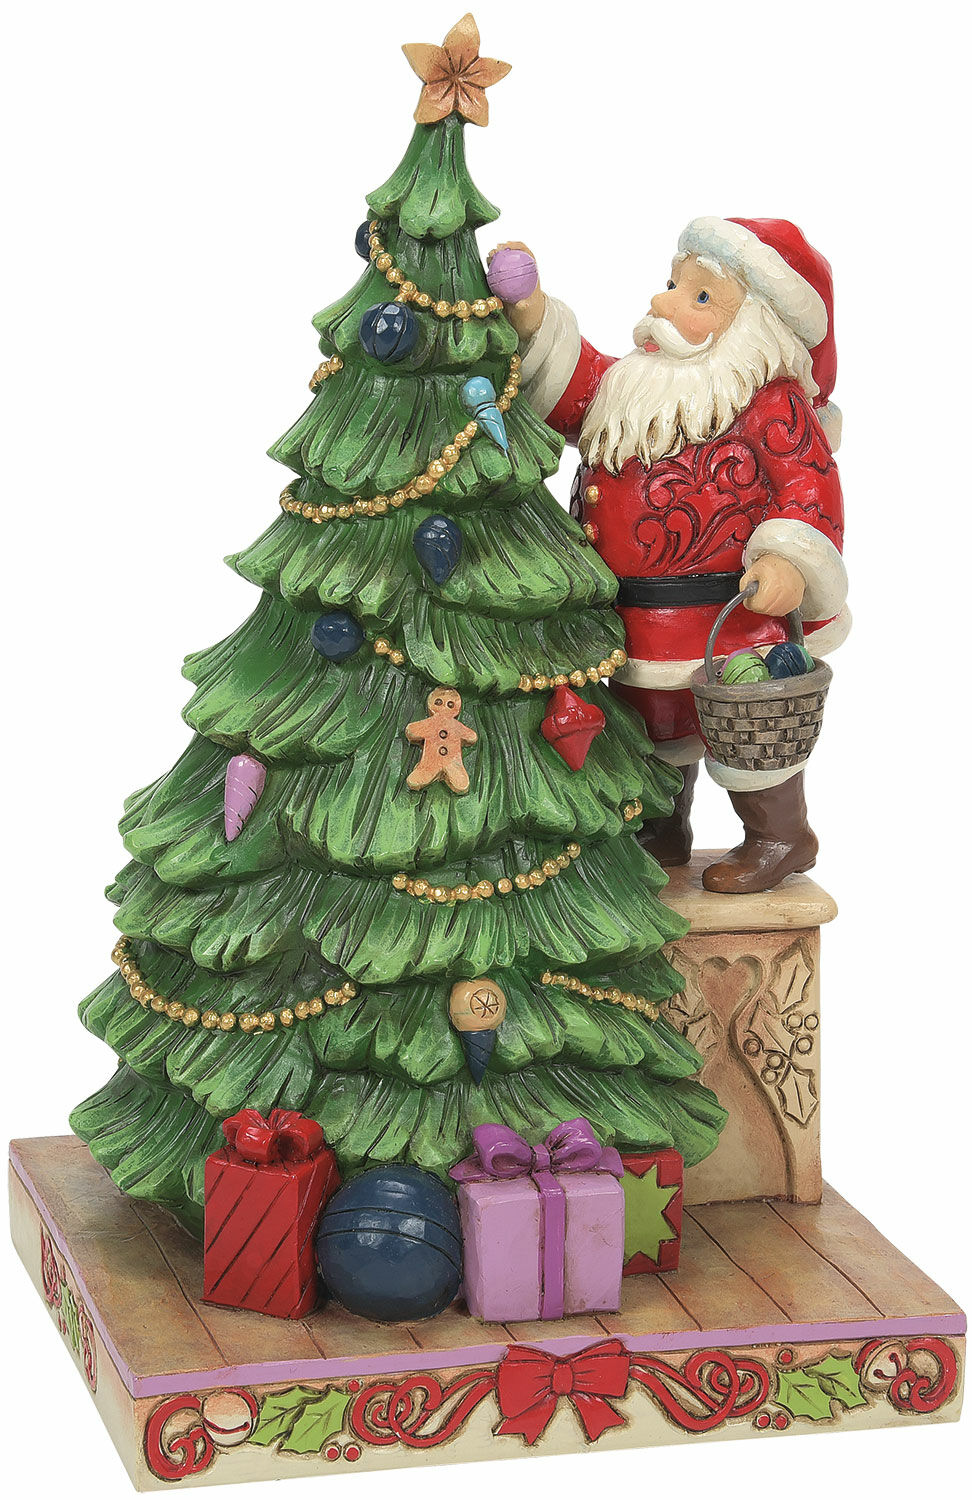 Sculpture "Santa with Christmas Tree", cast by Jim Shore